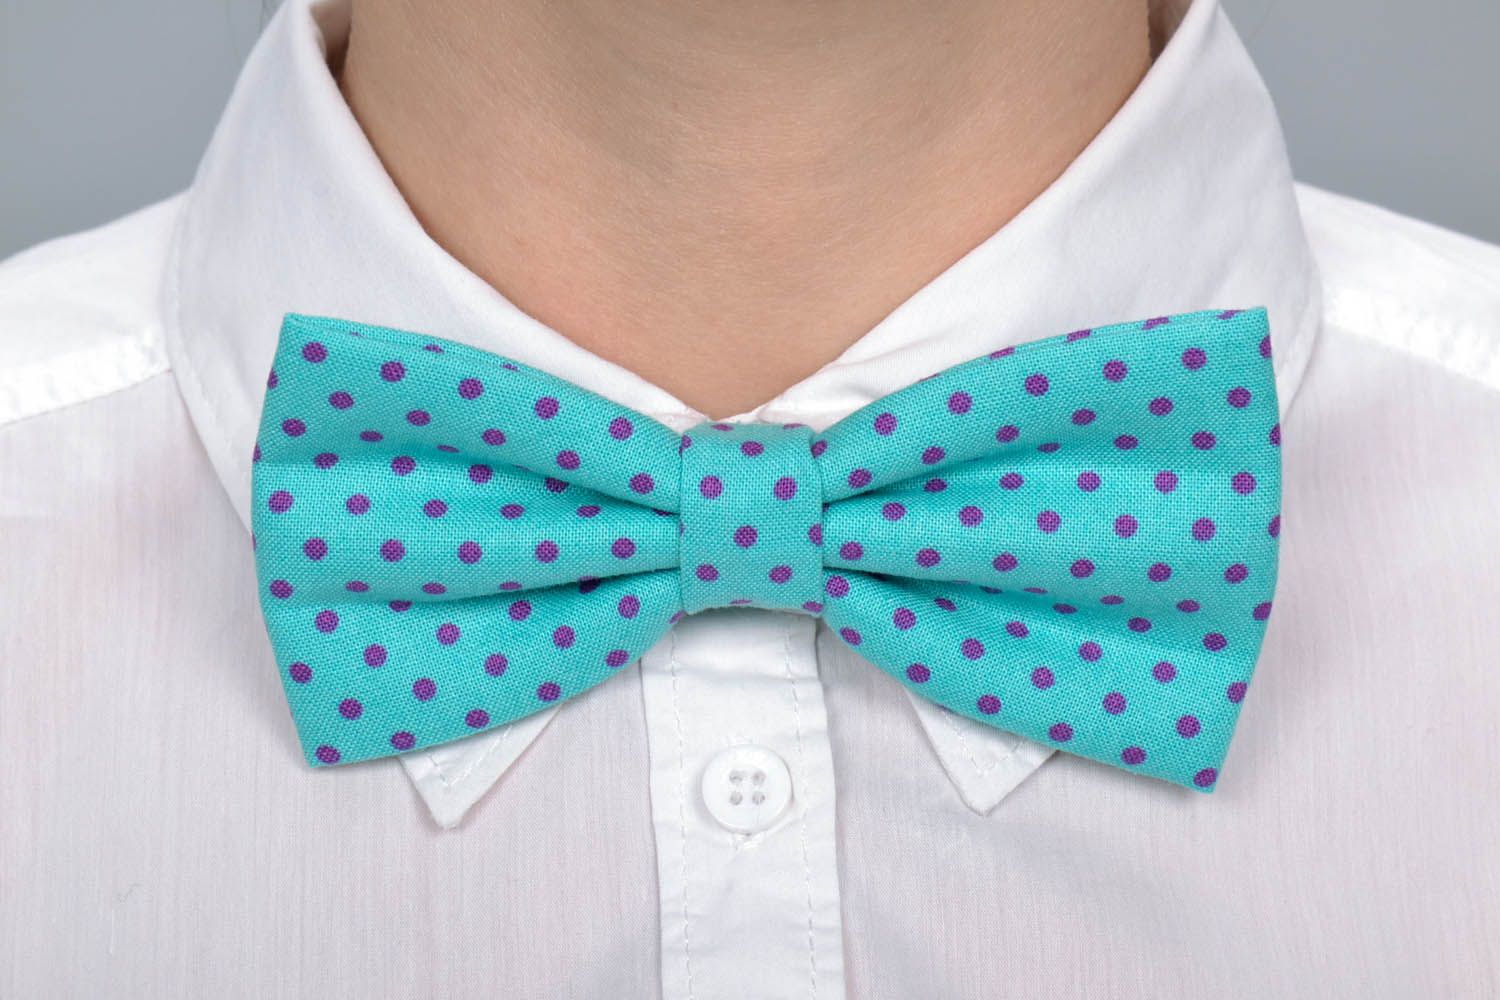 BUY Blue bow tie with polka dots 60485425 - HANDMADE GOODS at MADEHEART.COM